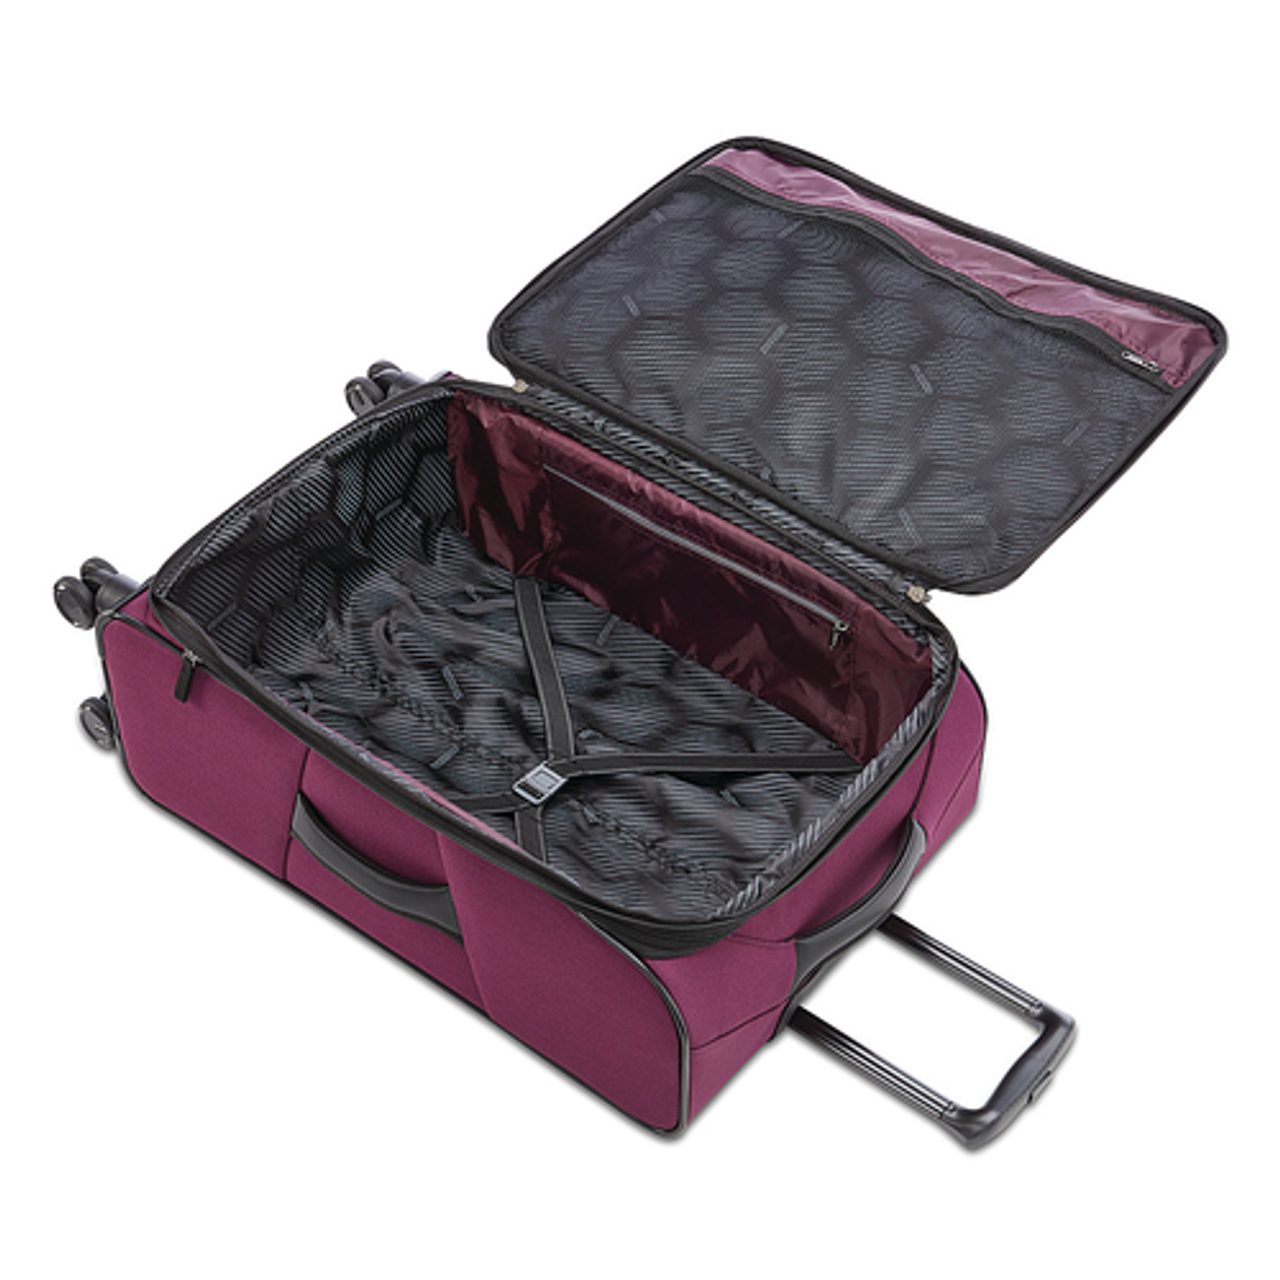 American Tourister - 4 Kix 2.0 24 Spinner - Purple Orchid